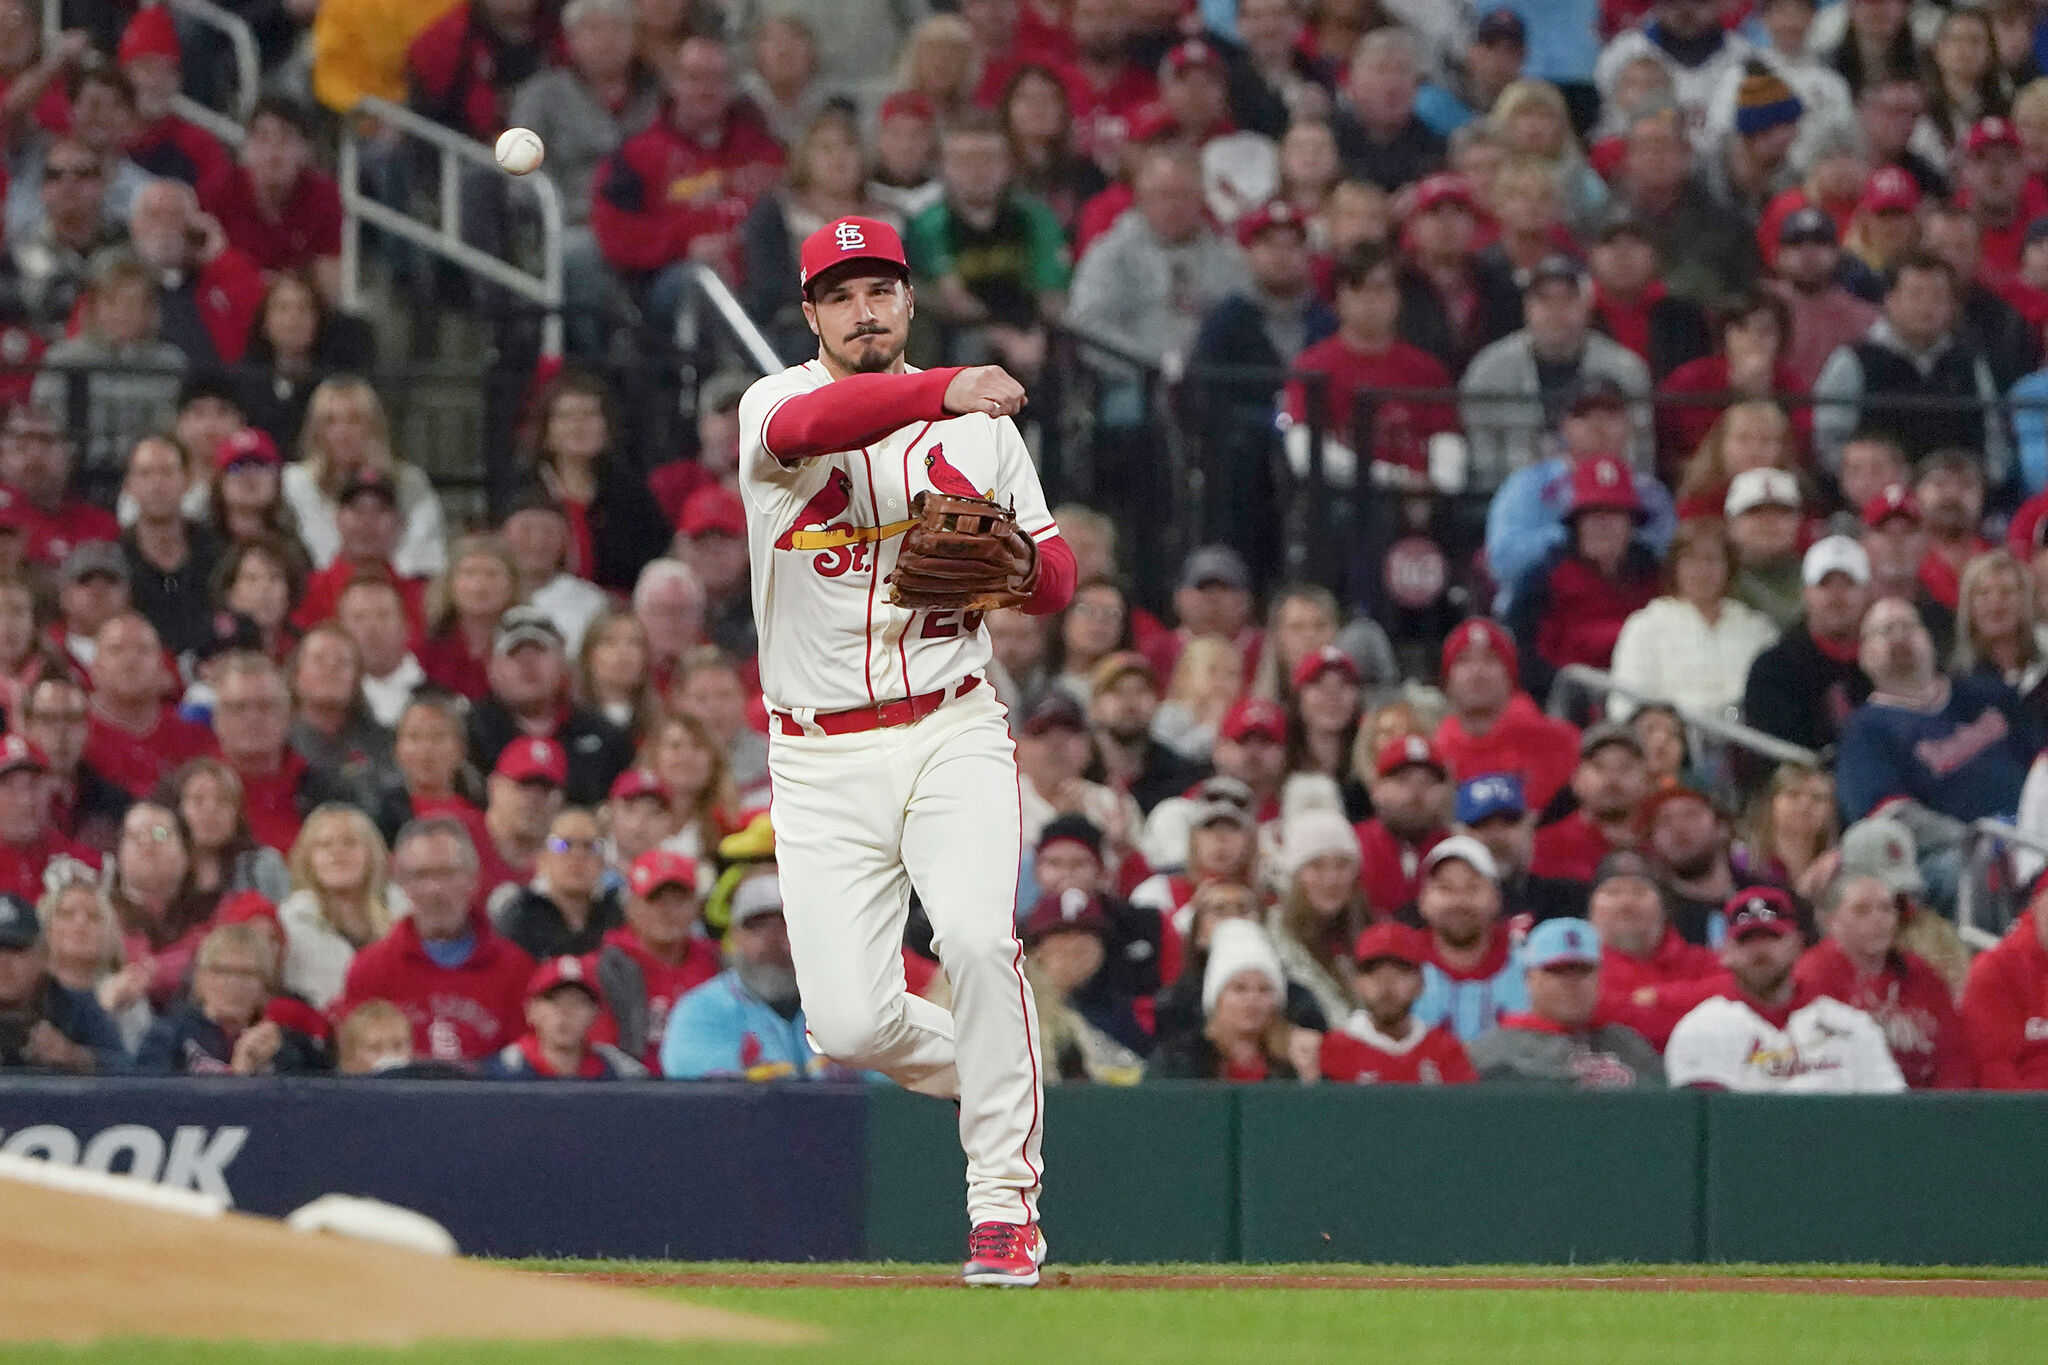 St. Louis Cardinals set new MLB record with five Gold Glove Award winners